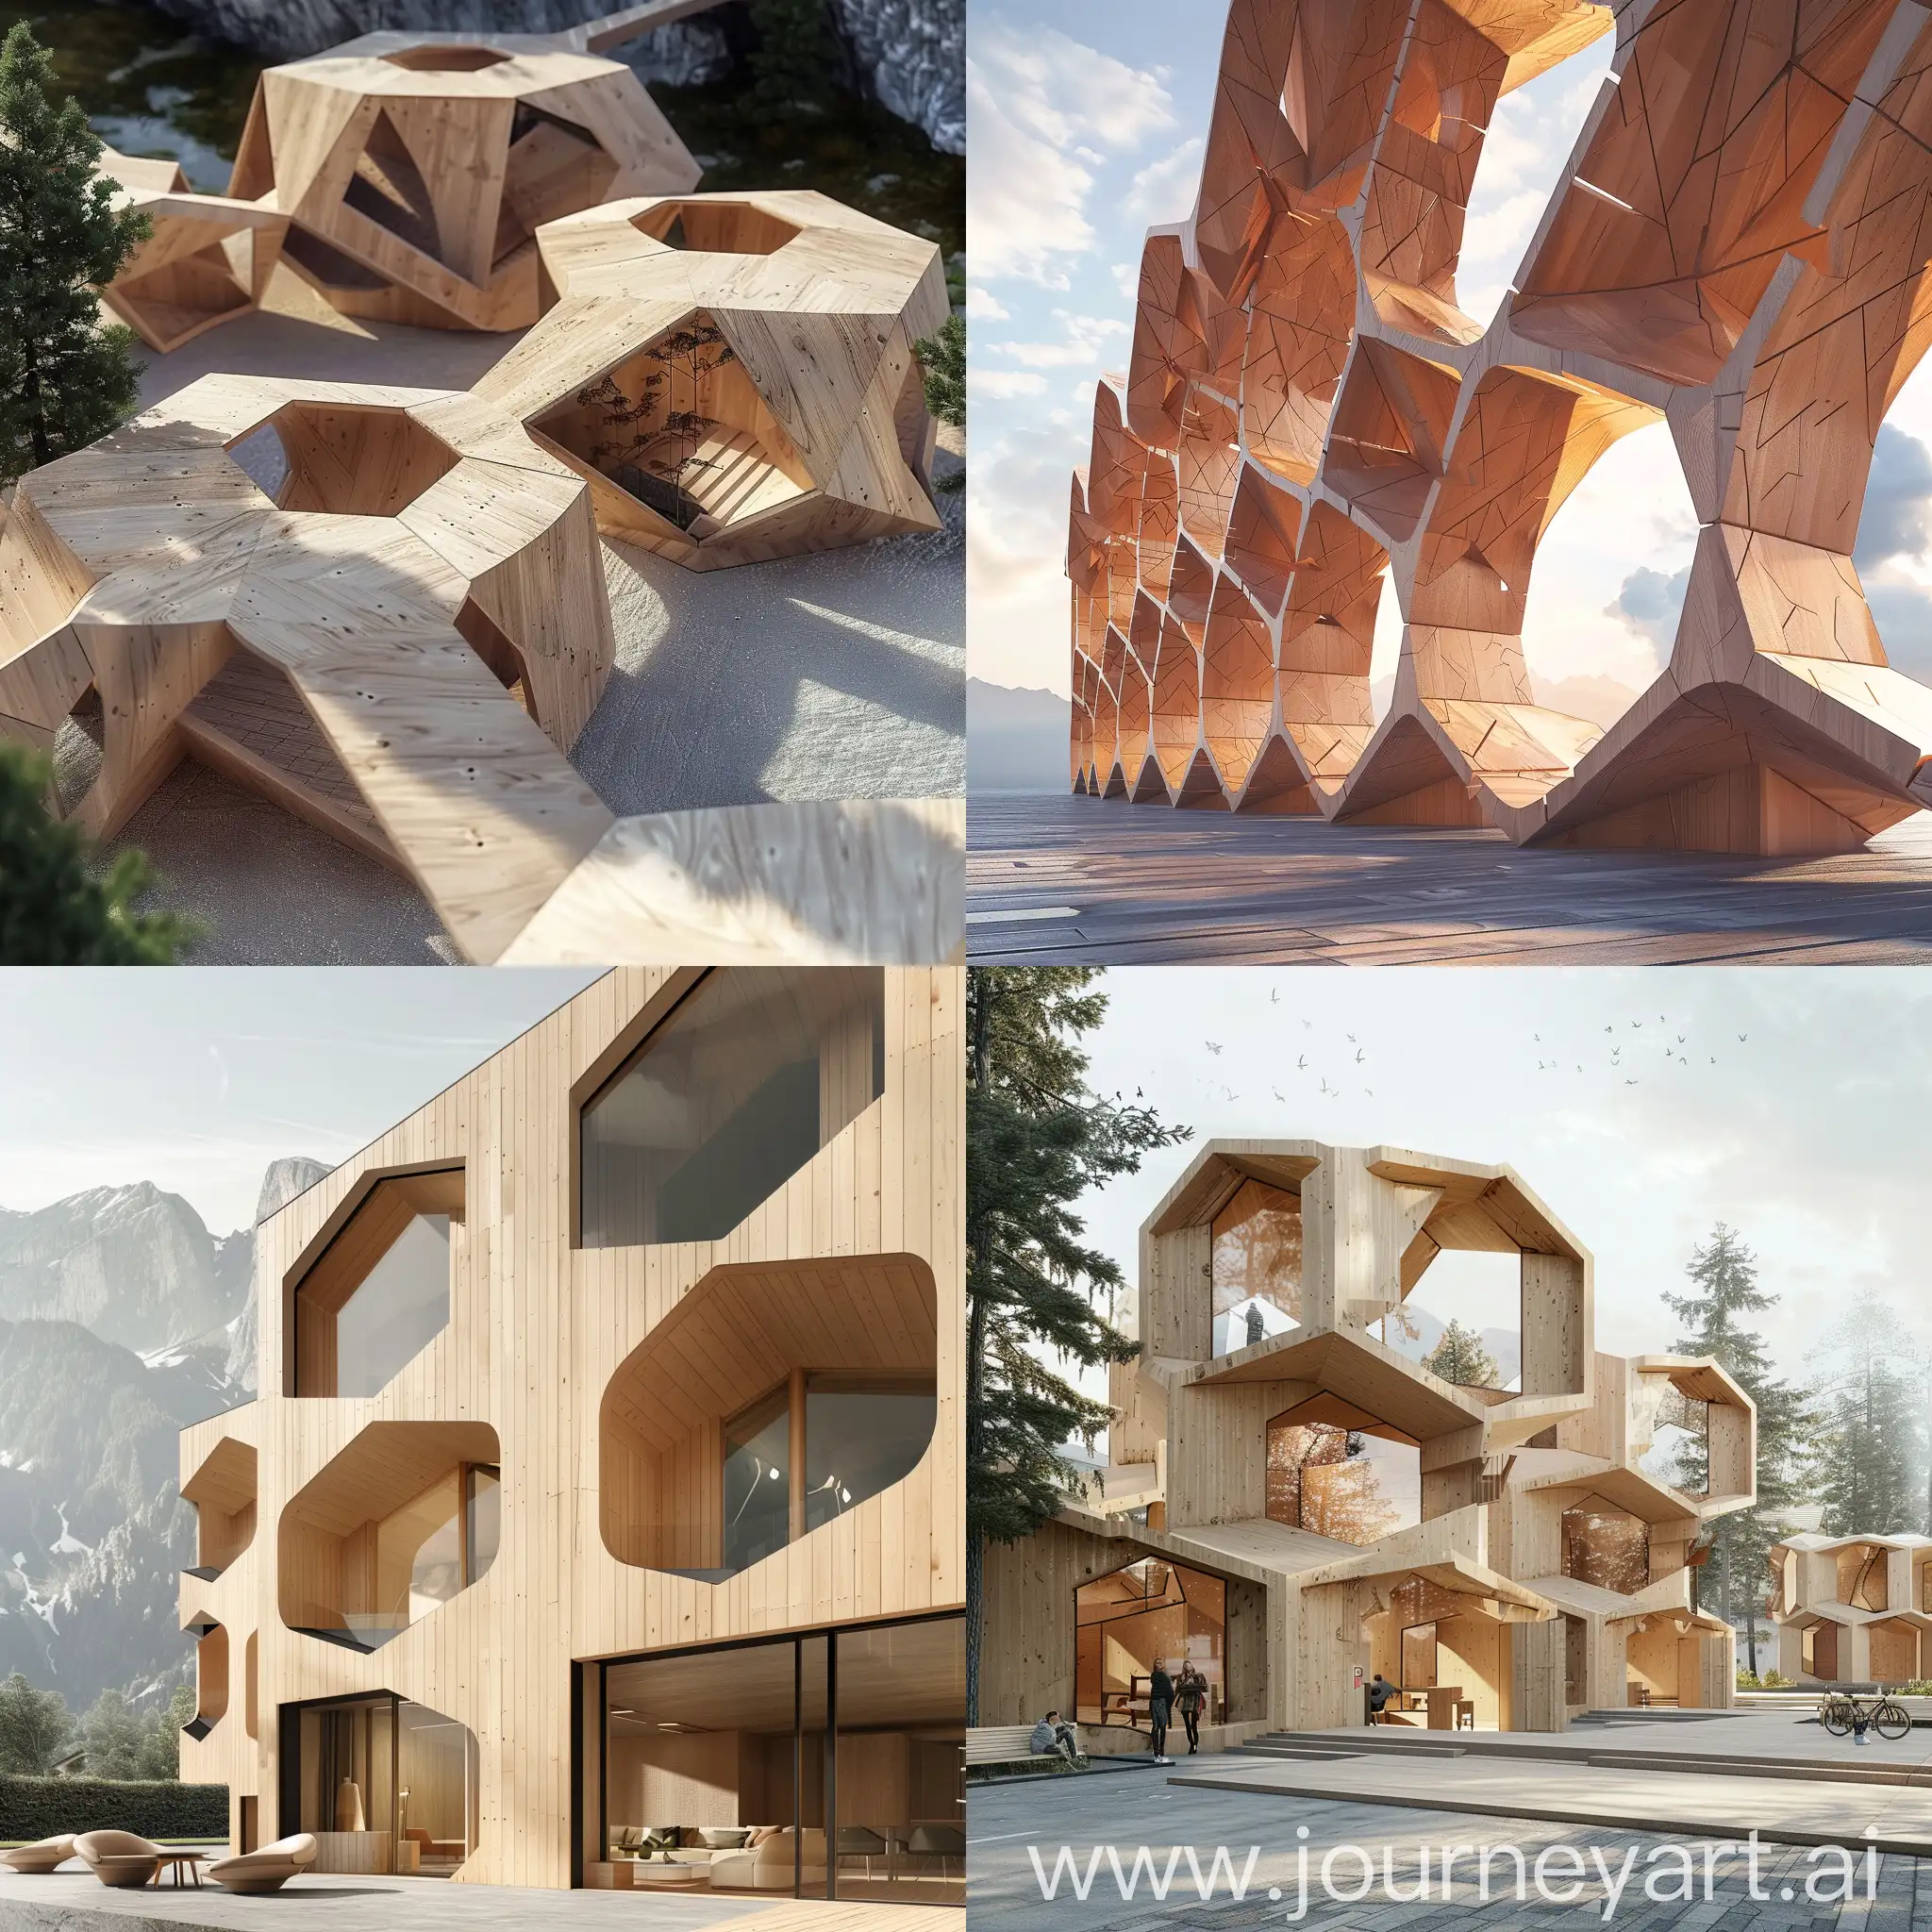 timber module joint detailed architectural render, the module is in line with discreet modular architecture principles as each module can be combined with other modules to create variety of architectural structures and shapes, the module is inspired by mountain Alpine culture. Timber modules connect with each other with smart interlocking shapes without any screws or metal elements